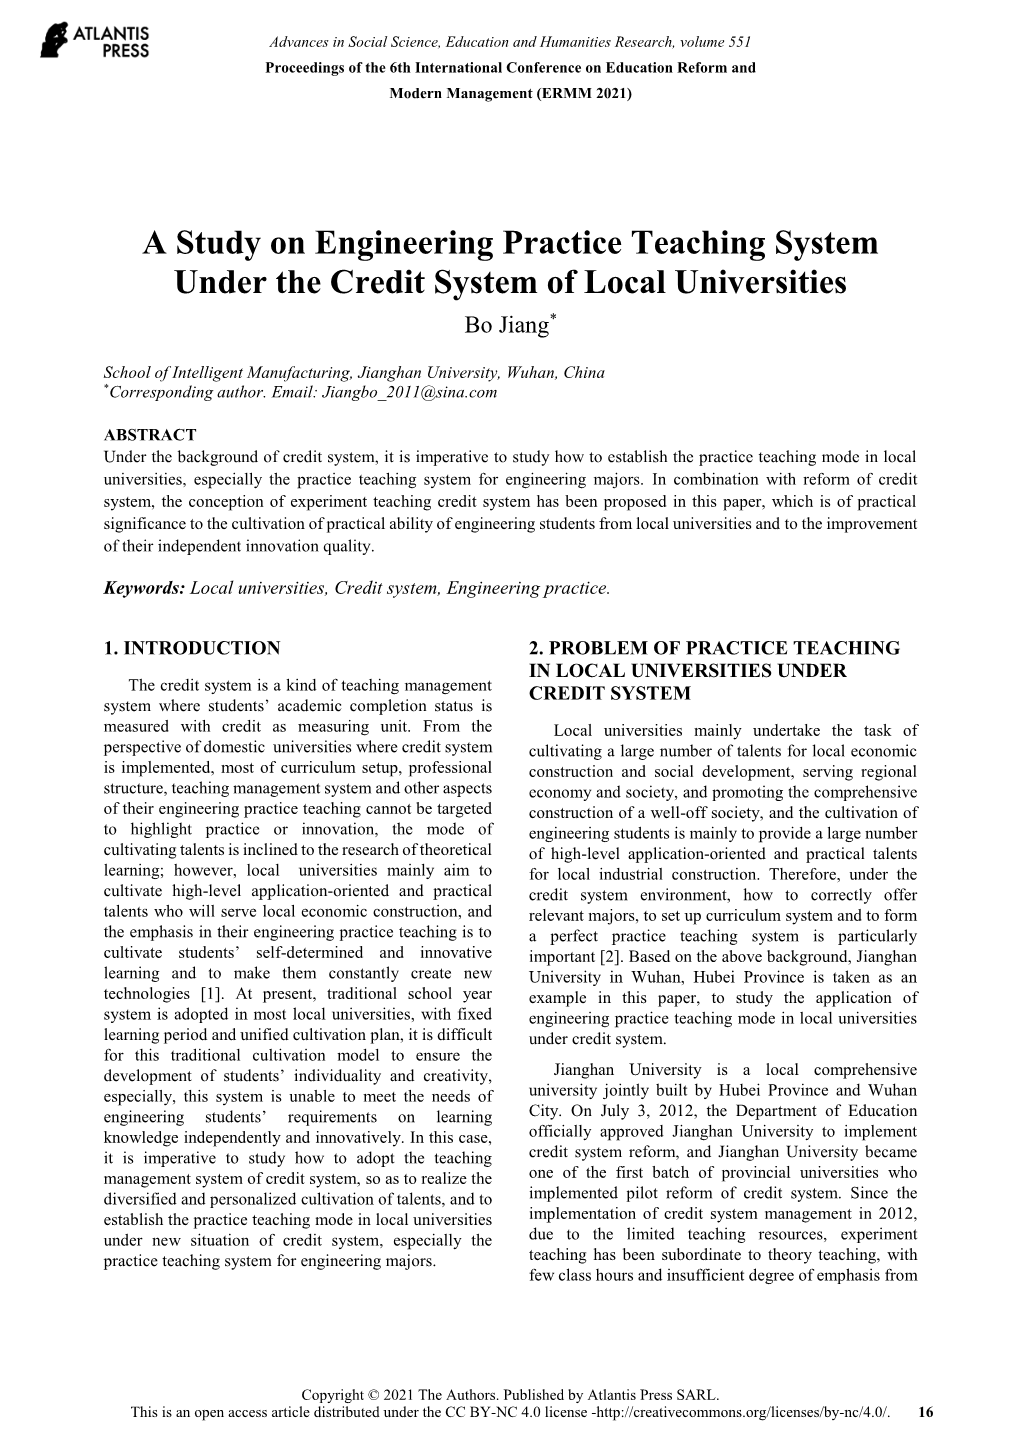 A Study on Engineering Practice Teaching System Under the Credit System of Local Universities Bo Jiang*